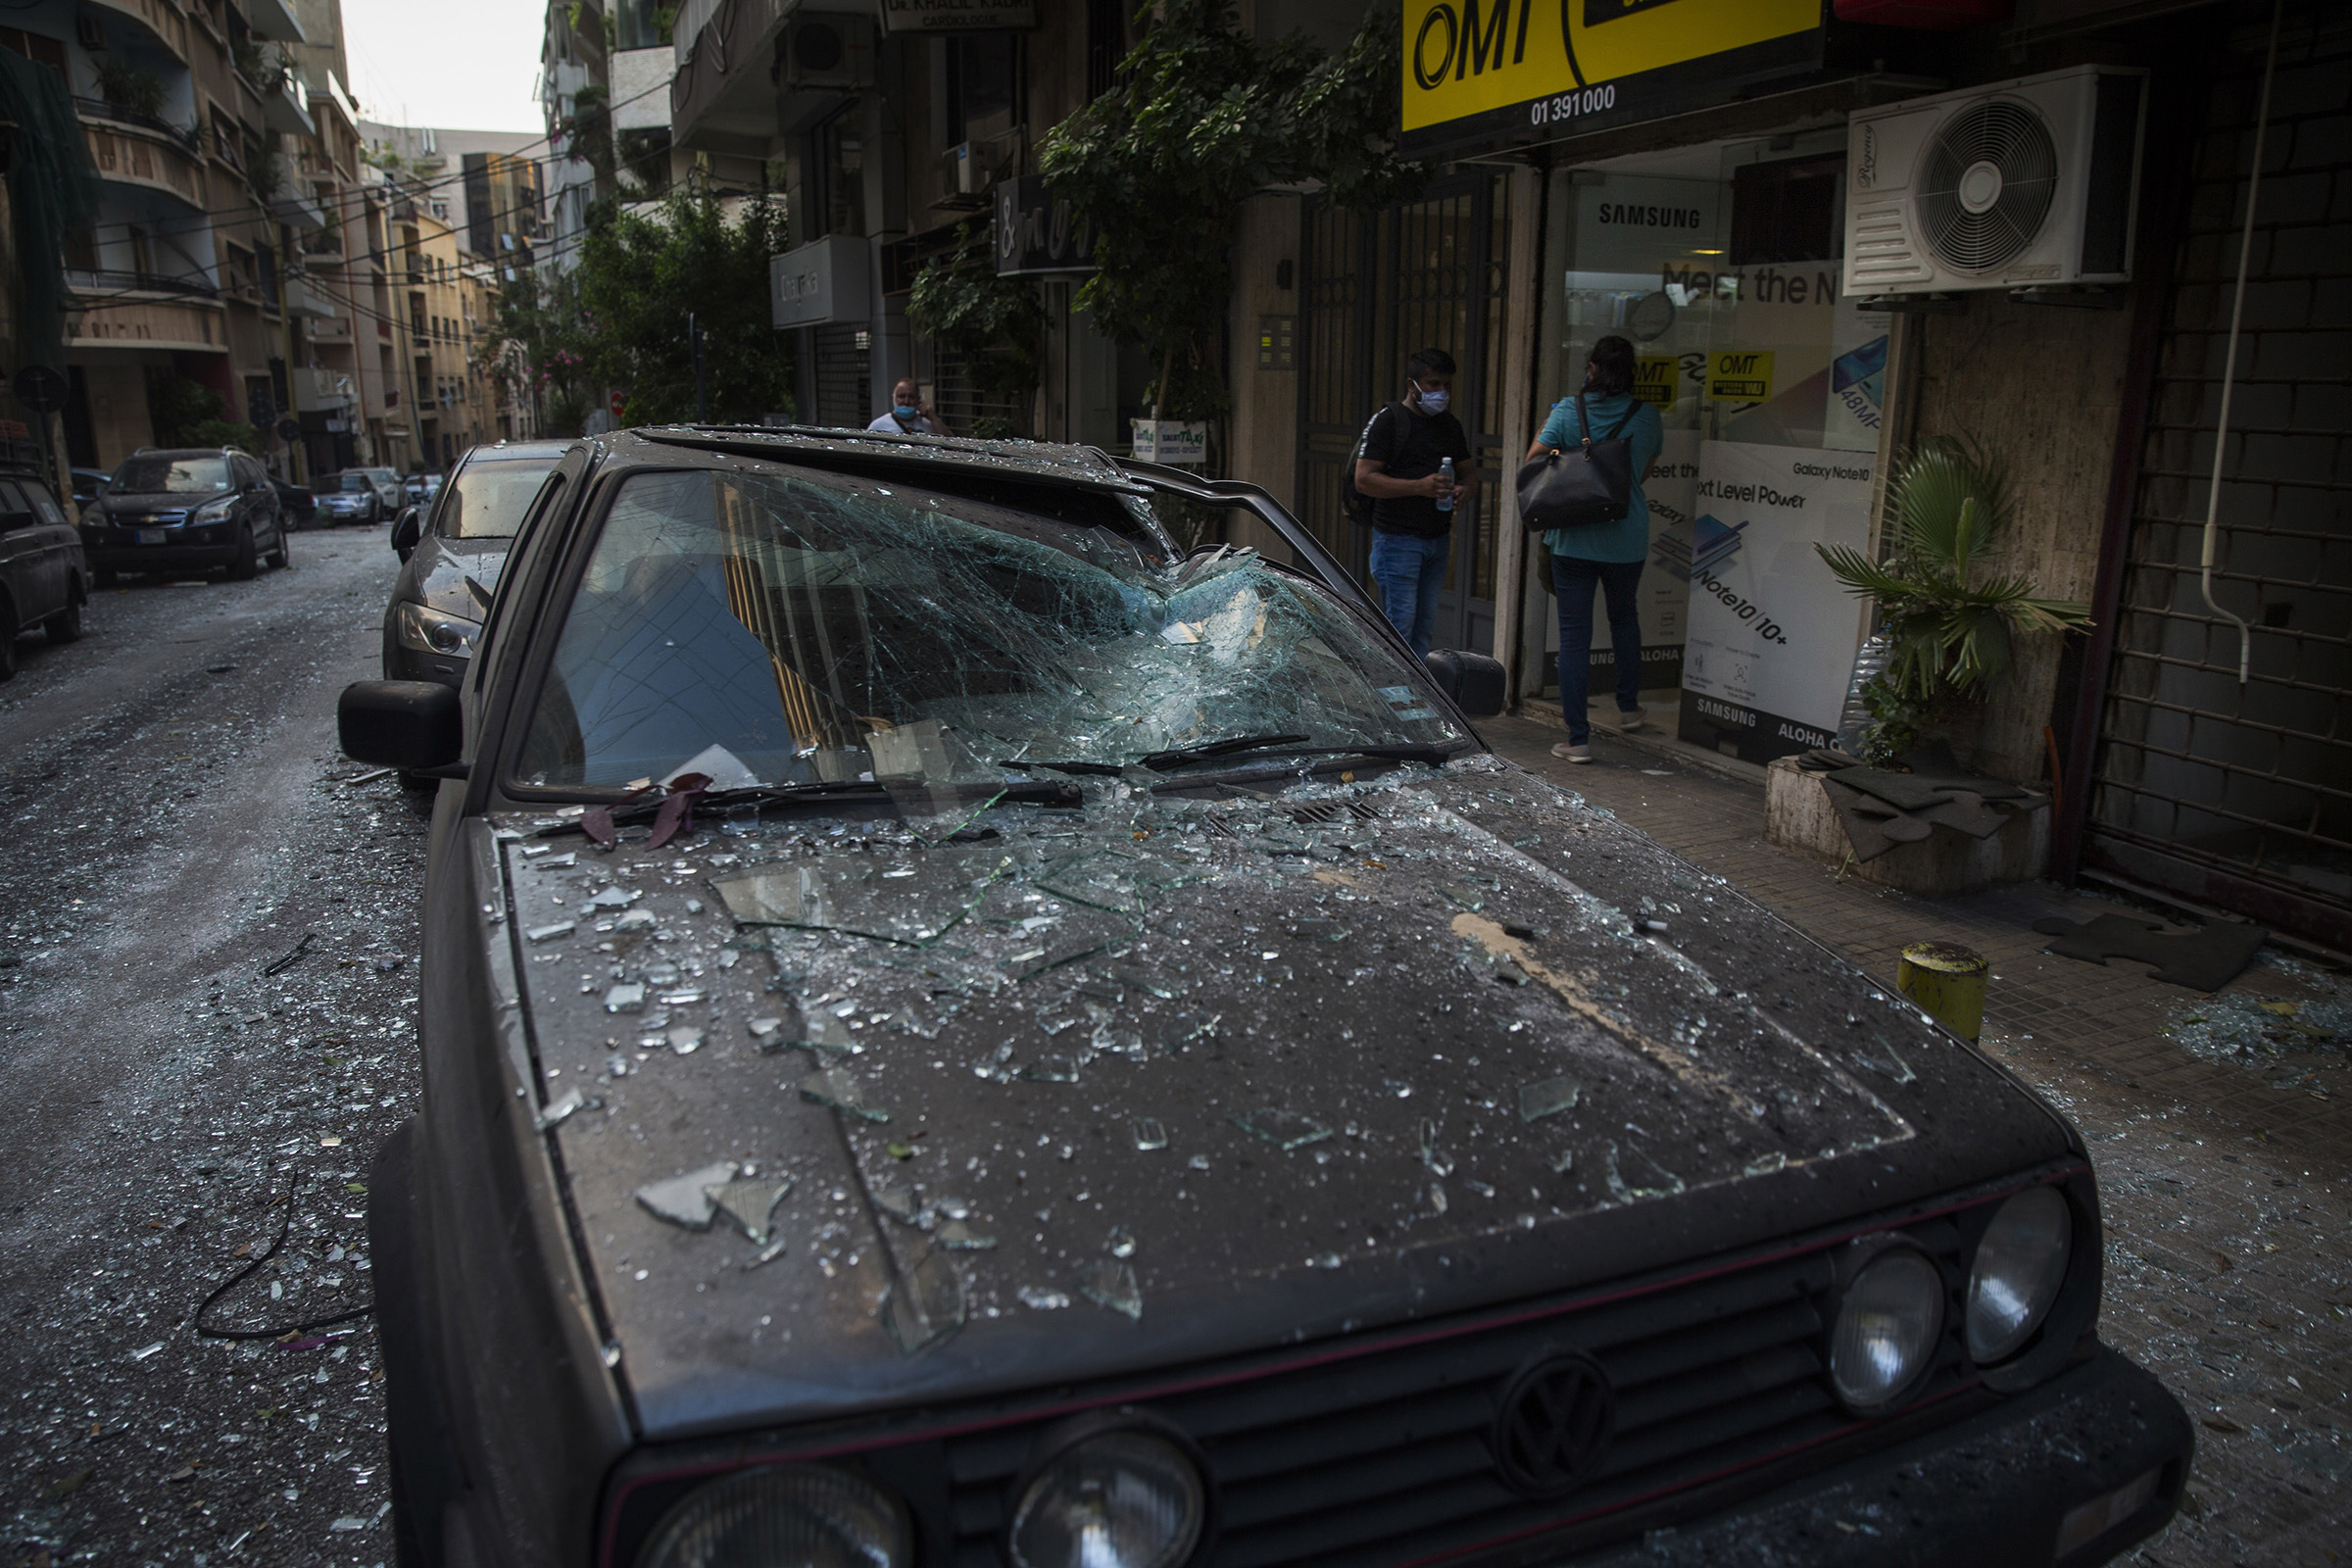 A car is damaged after the explosion. (Daniel Carde—Getty Images)